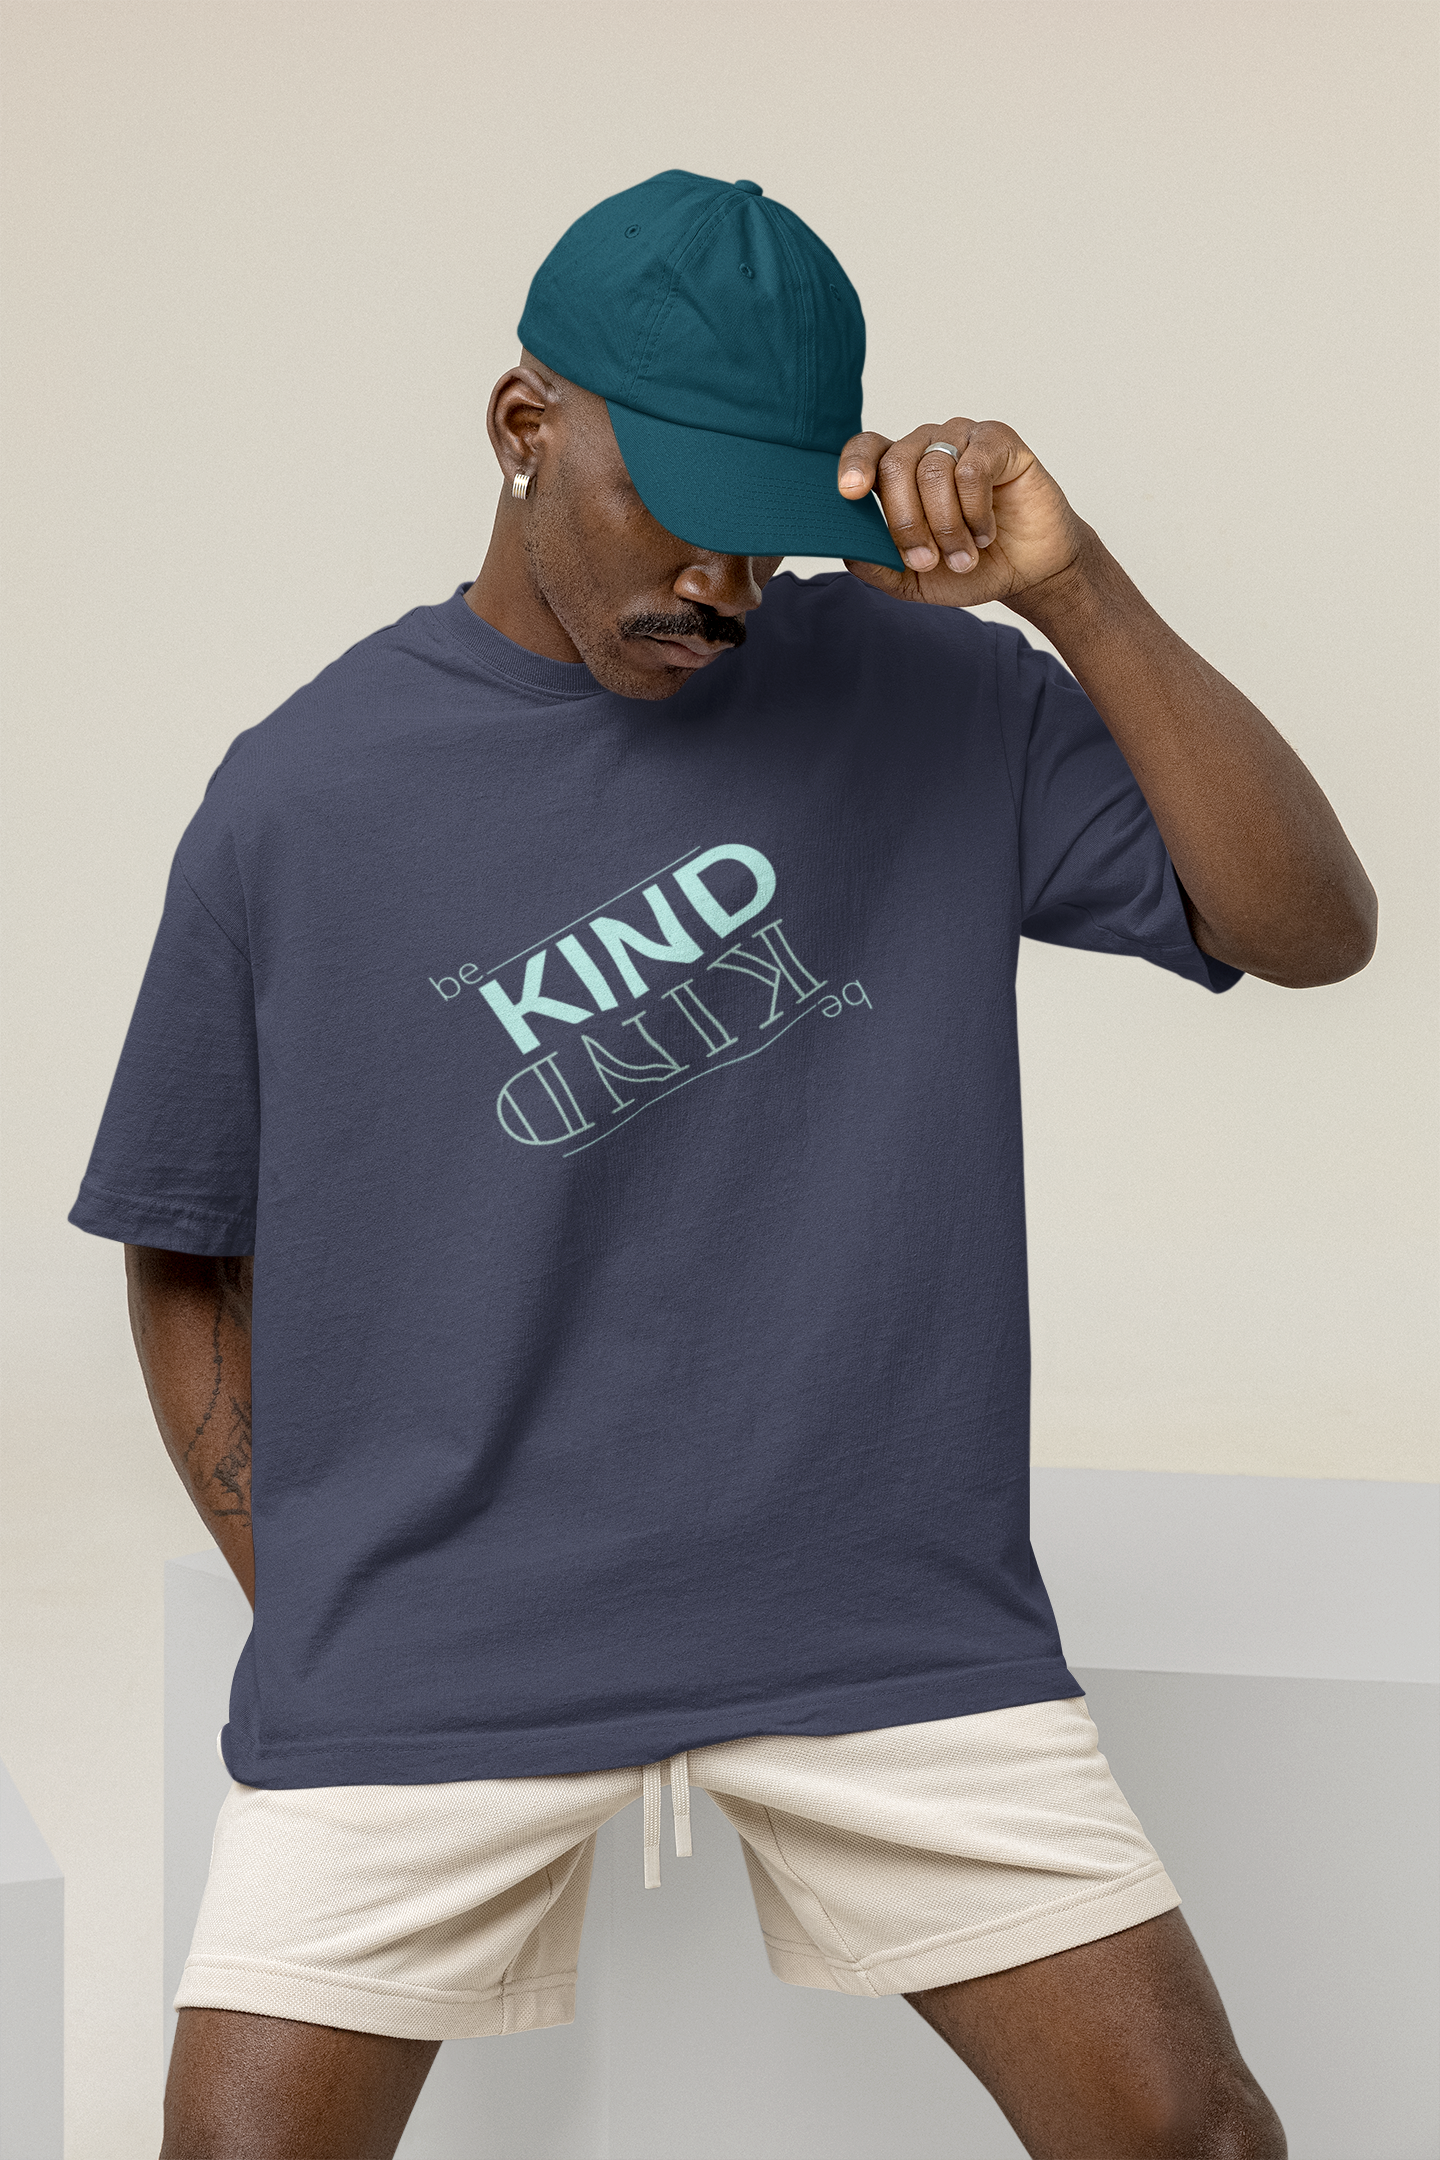 Oversized Black tshirt in Navy Blue color with the slogan Be Kind